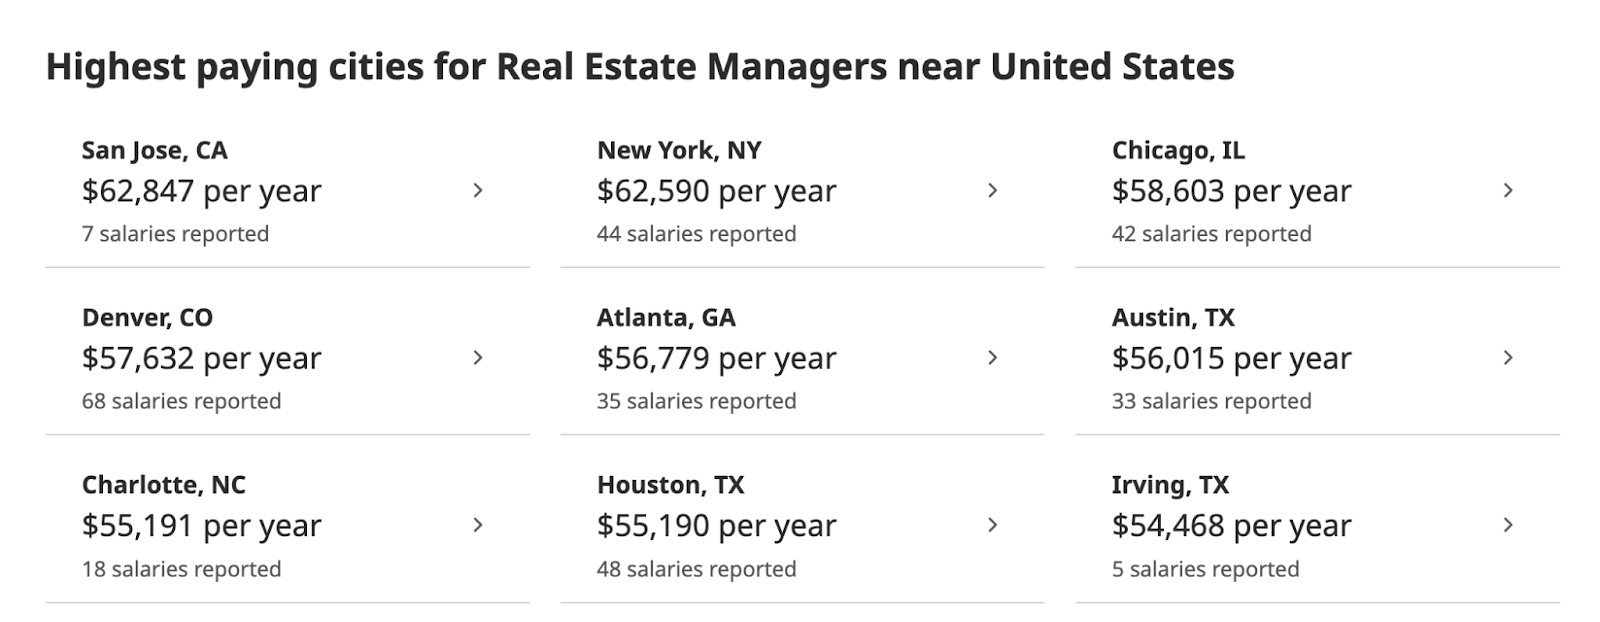 Real Estate Managers near US